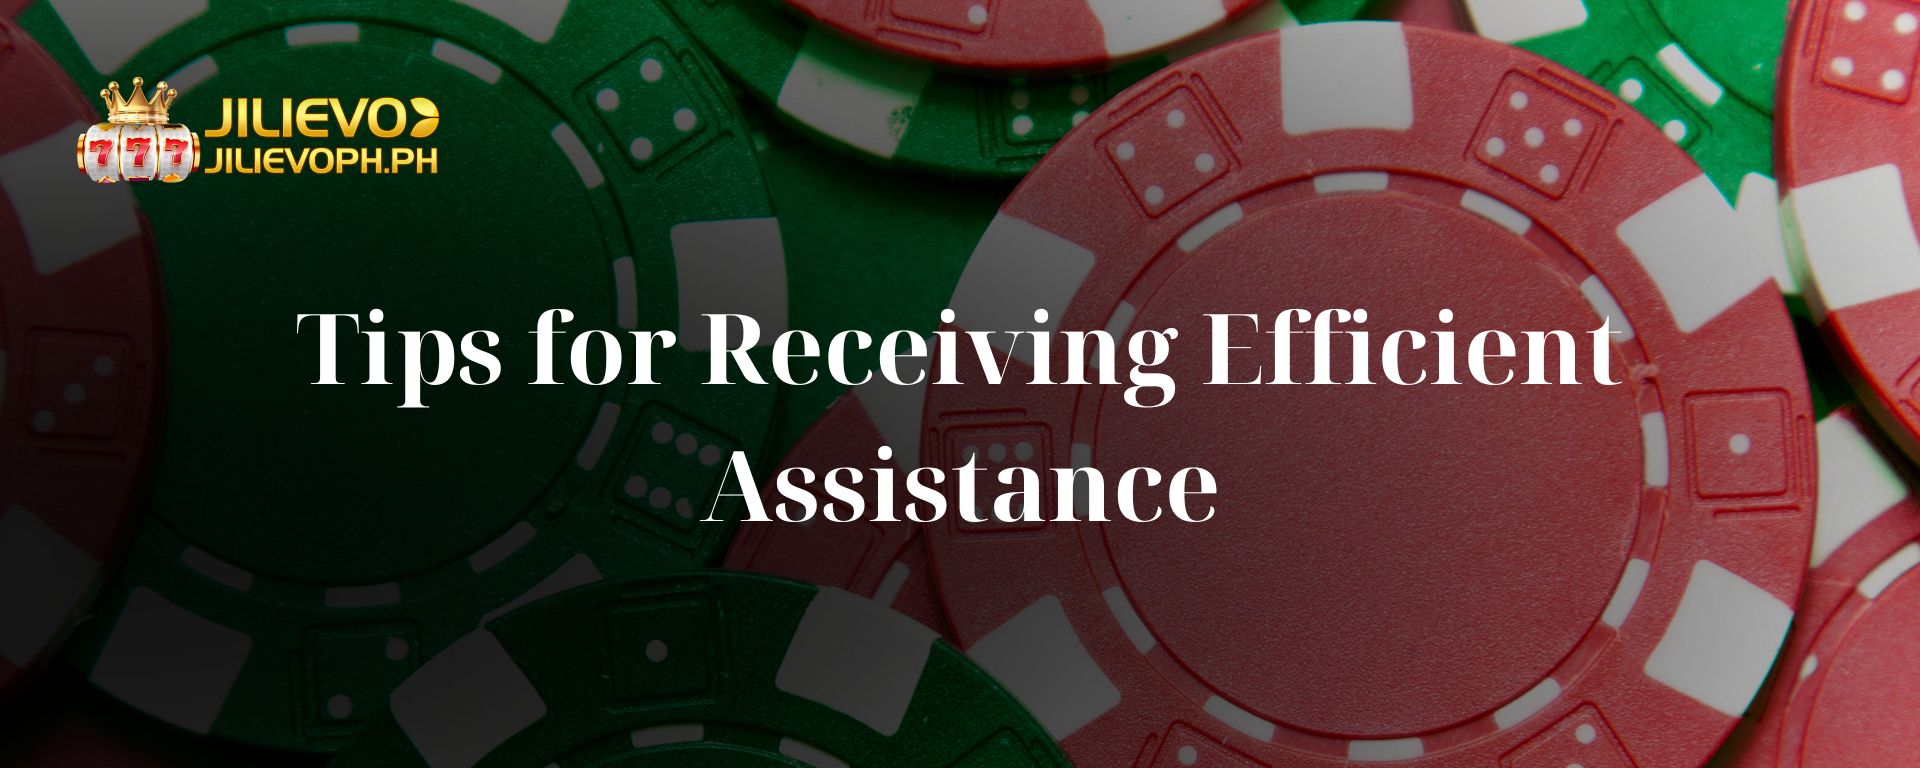 Tips for Receiving Efficient Assistance